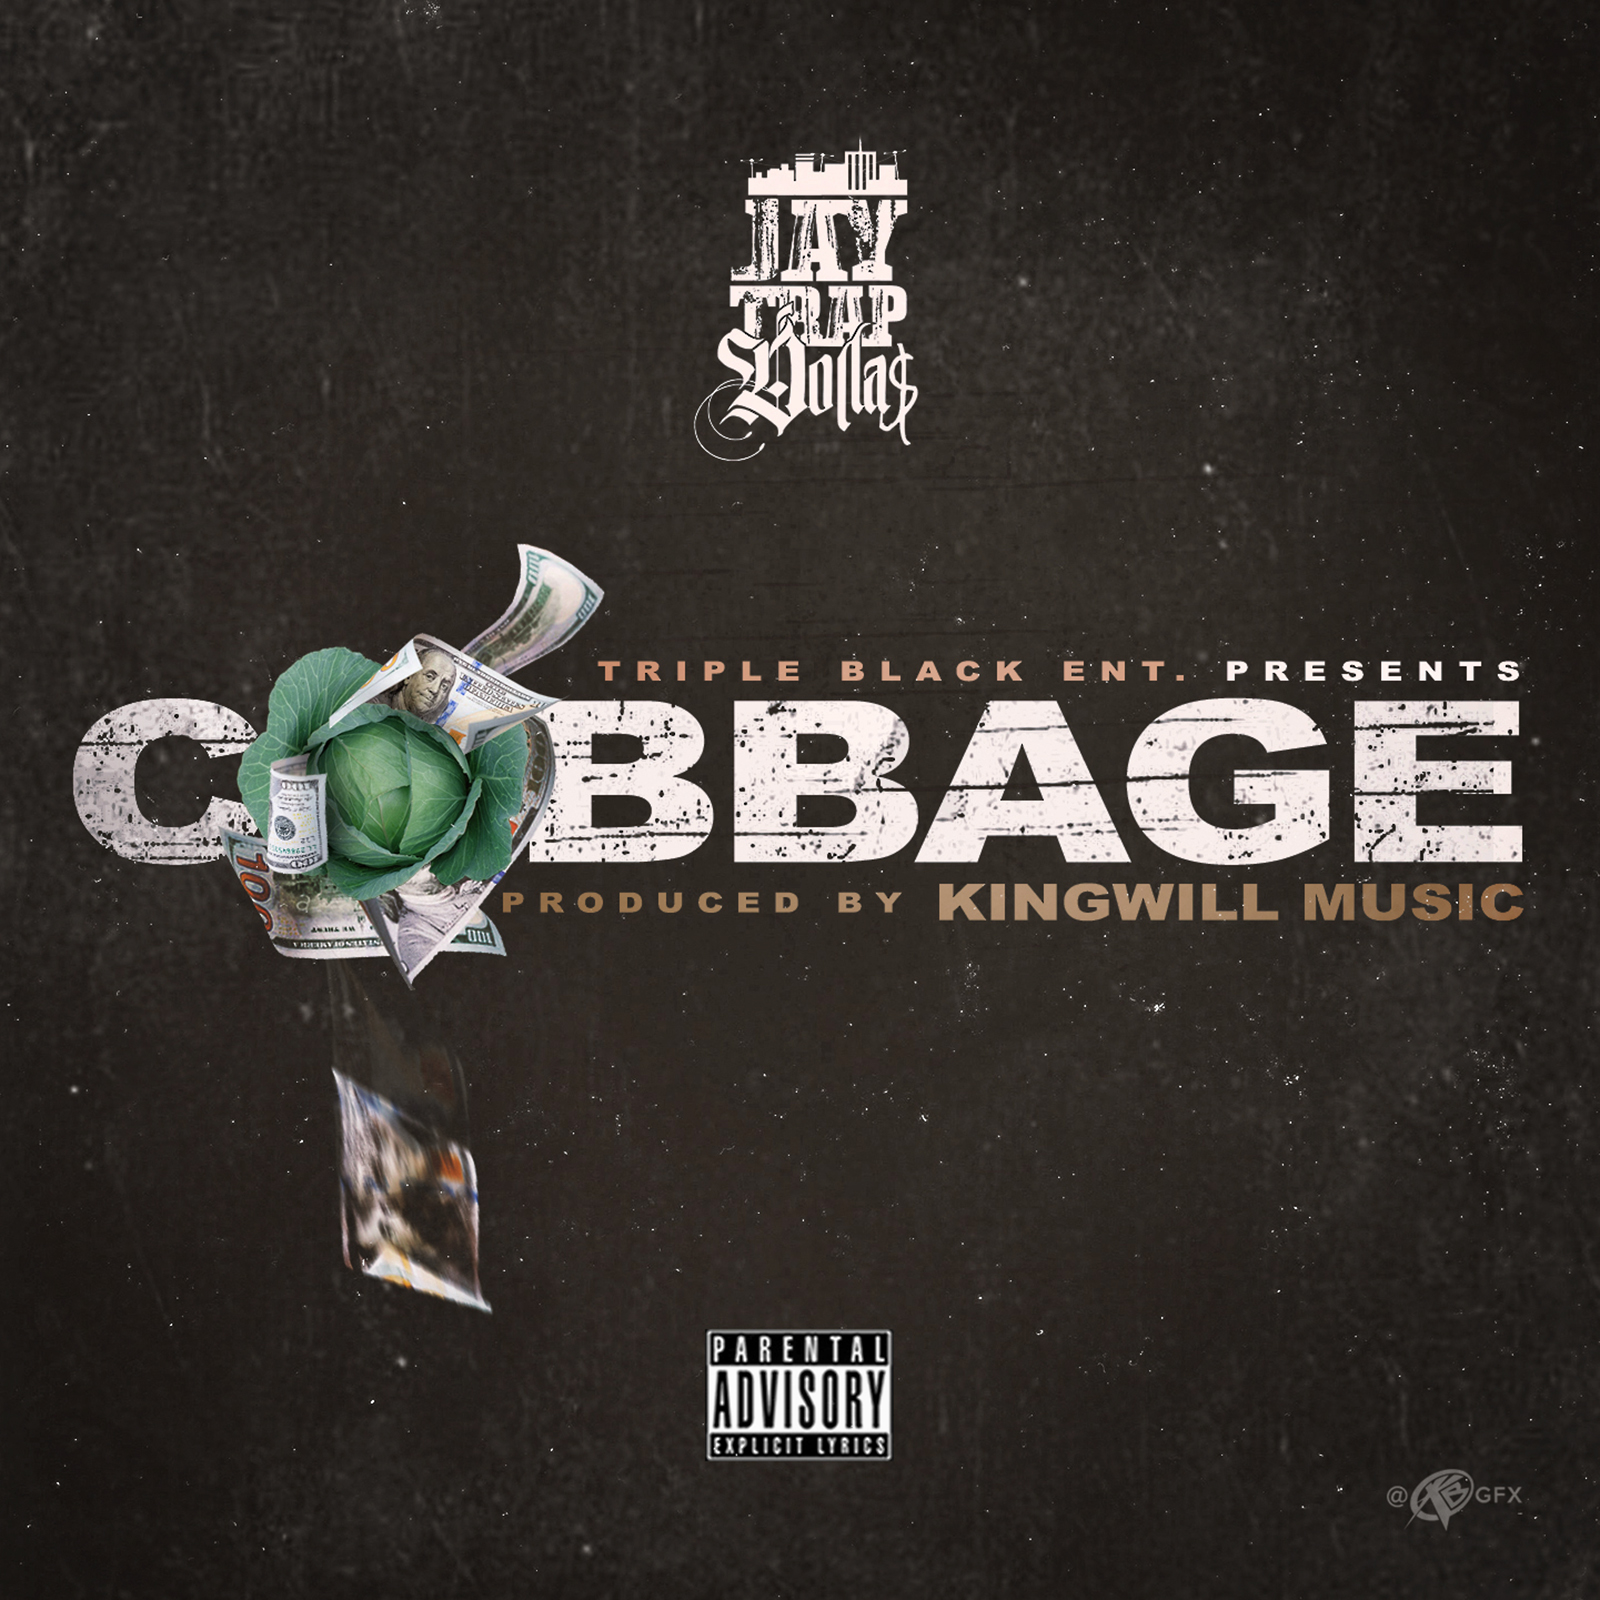 New Music! Jay Trap Dolla$-Cabbage @Jay_Trap_Dollas_tbe